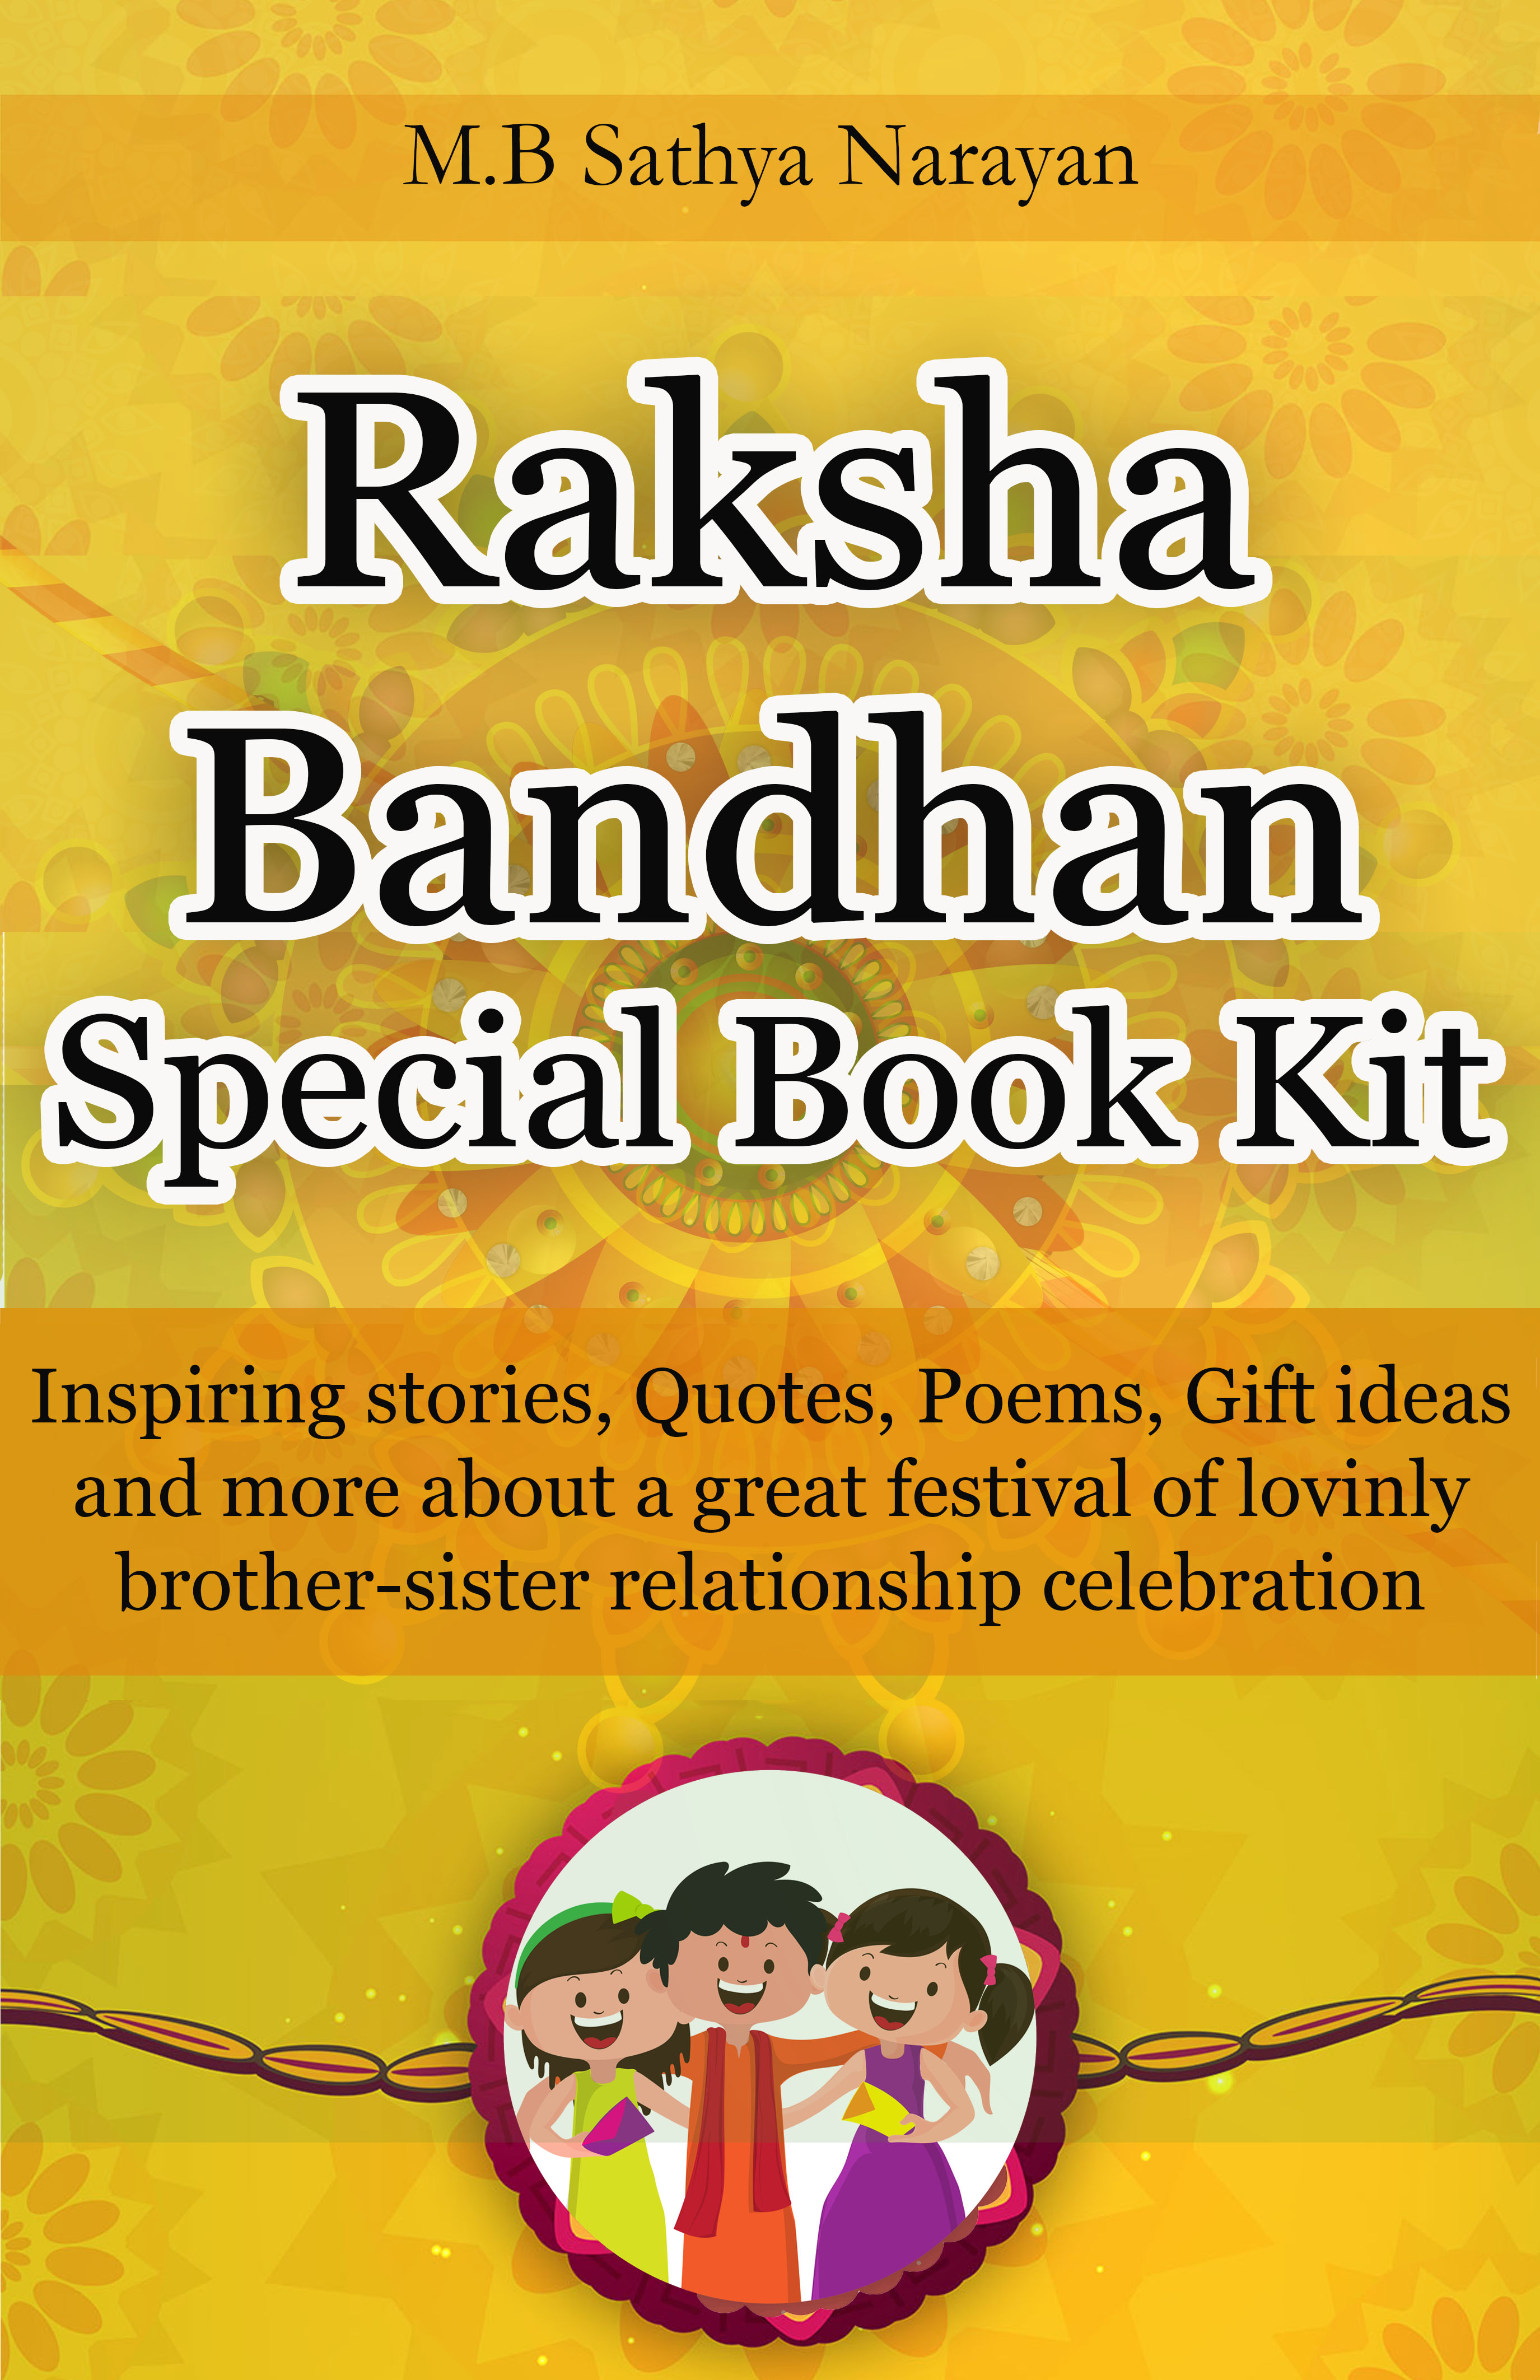 FREE: Raksha Bandhan Festival Special Book Kit: Inspiring Stories, Quotes, Poems, Gift ideas, and more about a great festival of lovingly Brother-Sister relationship celebration by M.B Sathya Narayan